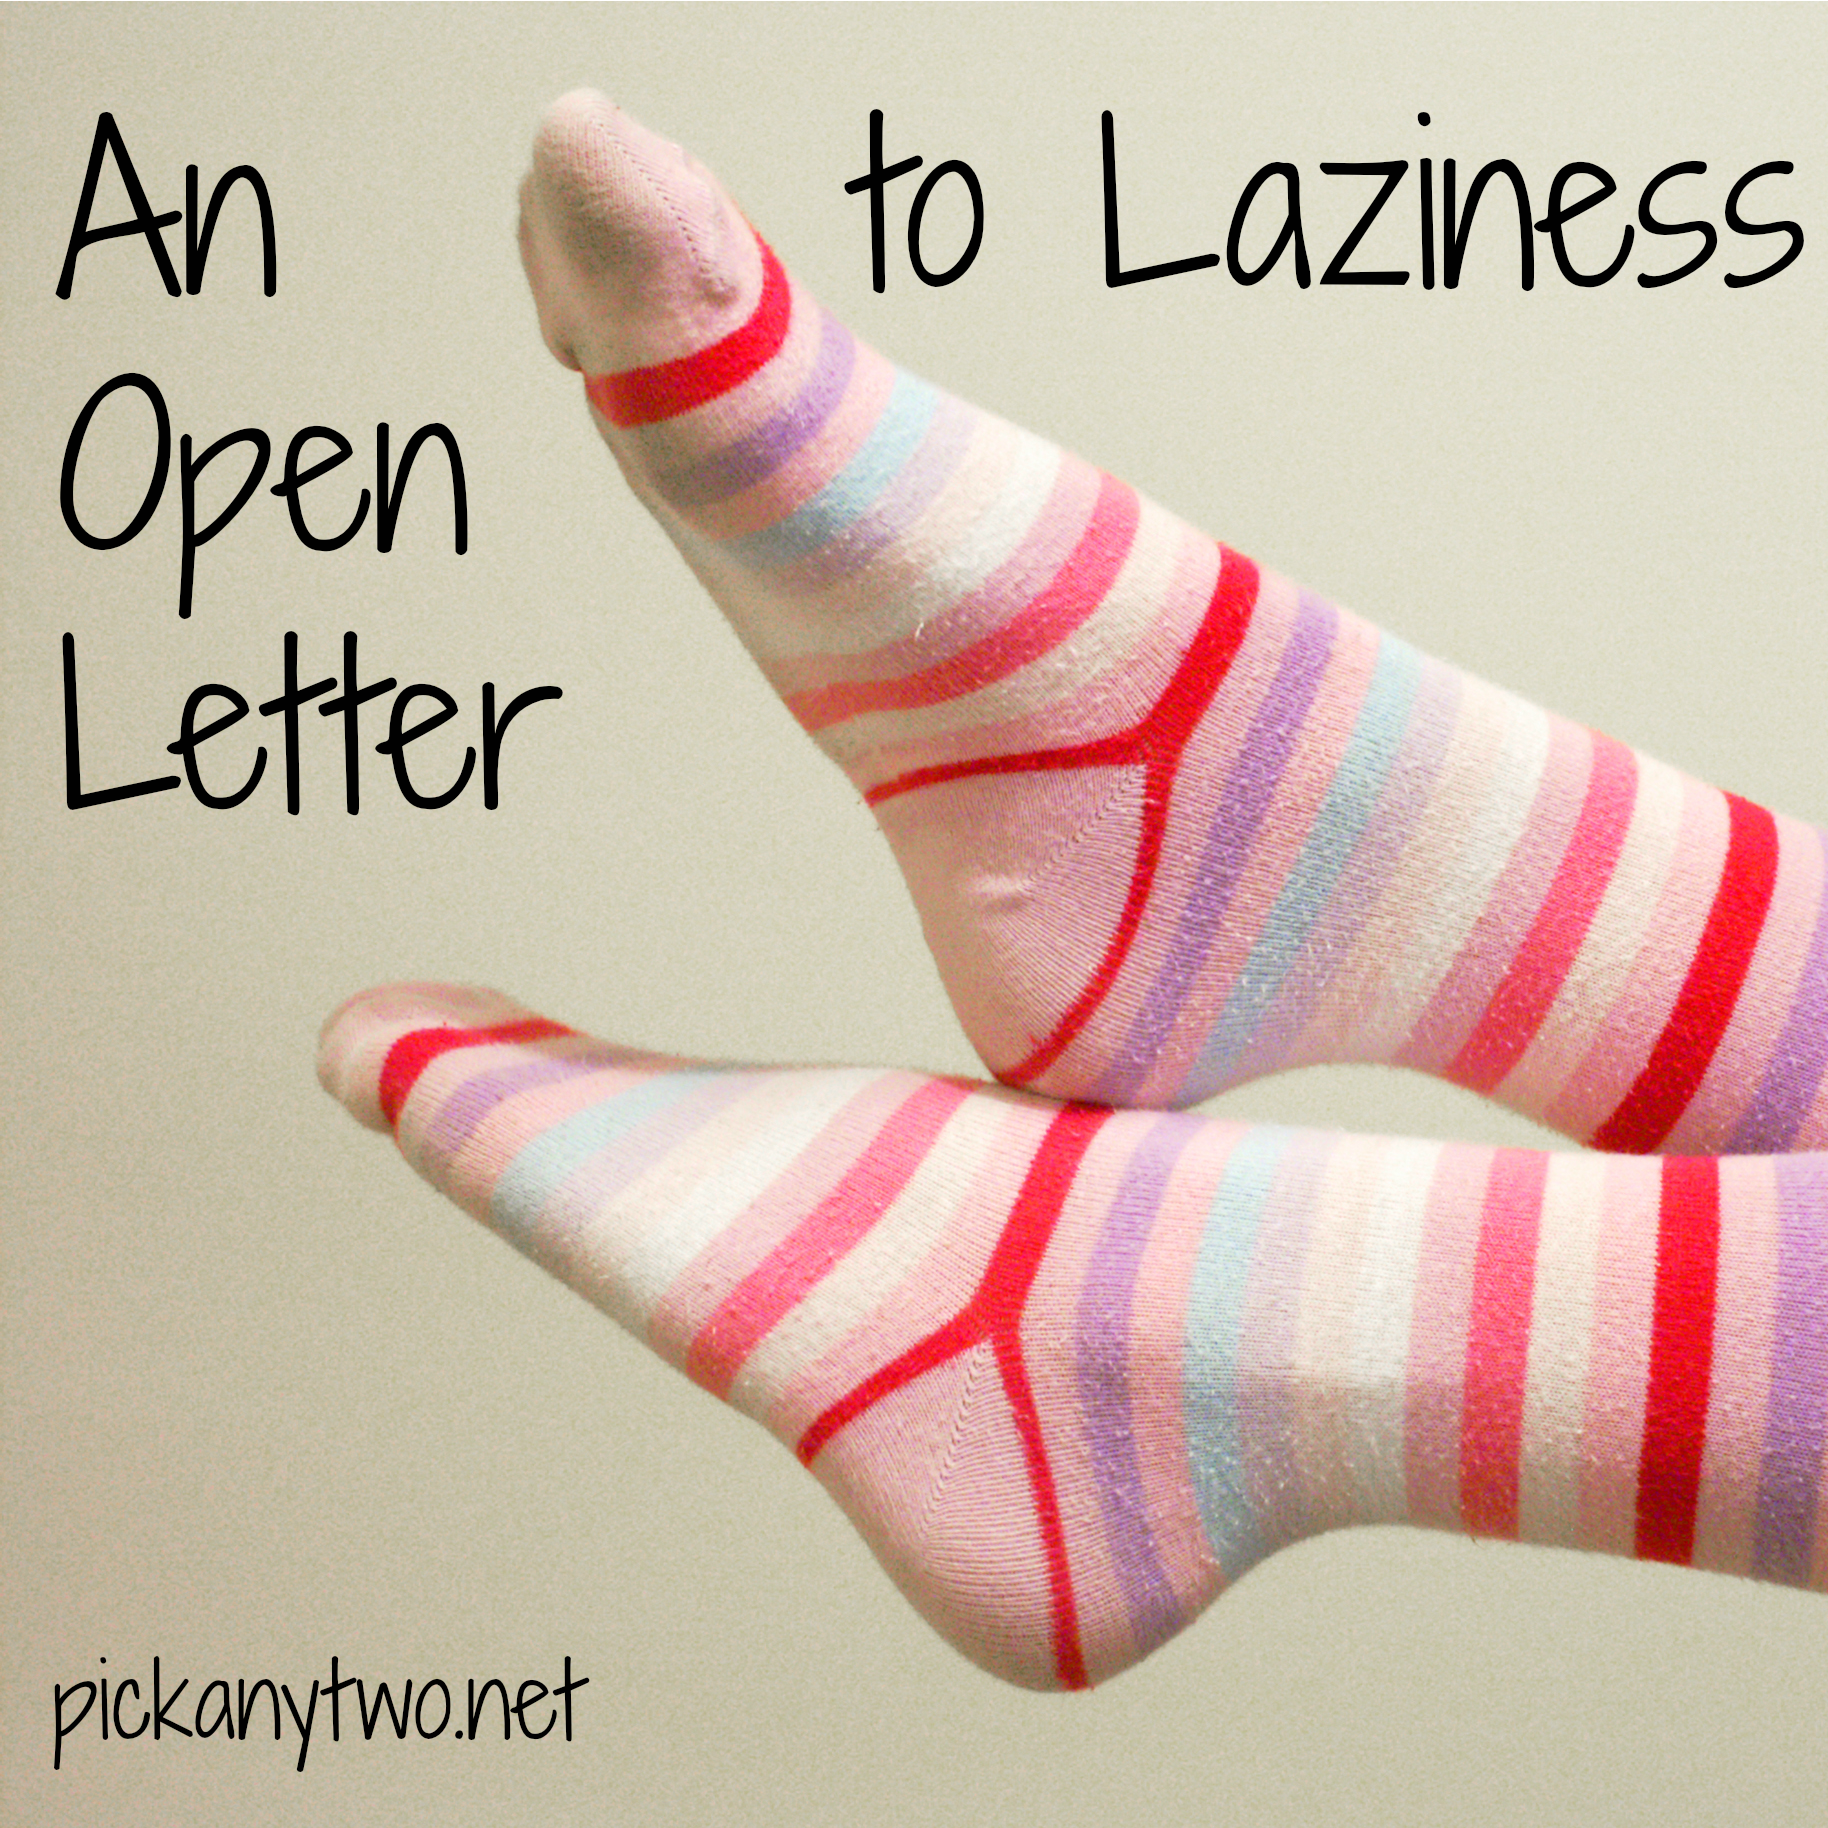 An Open Letter to Laziness